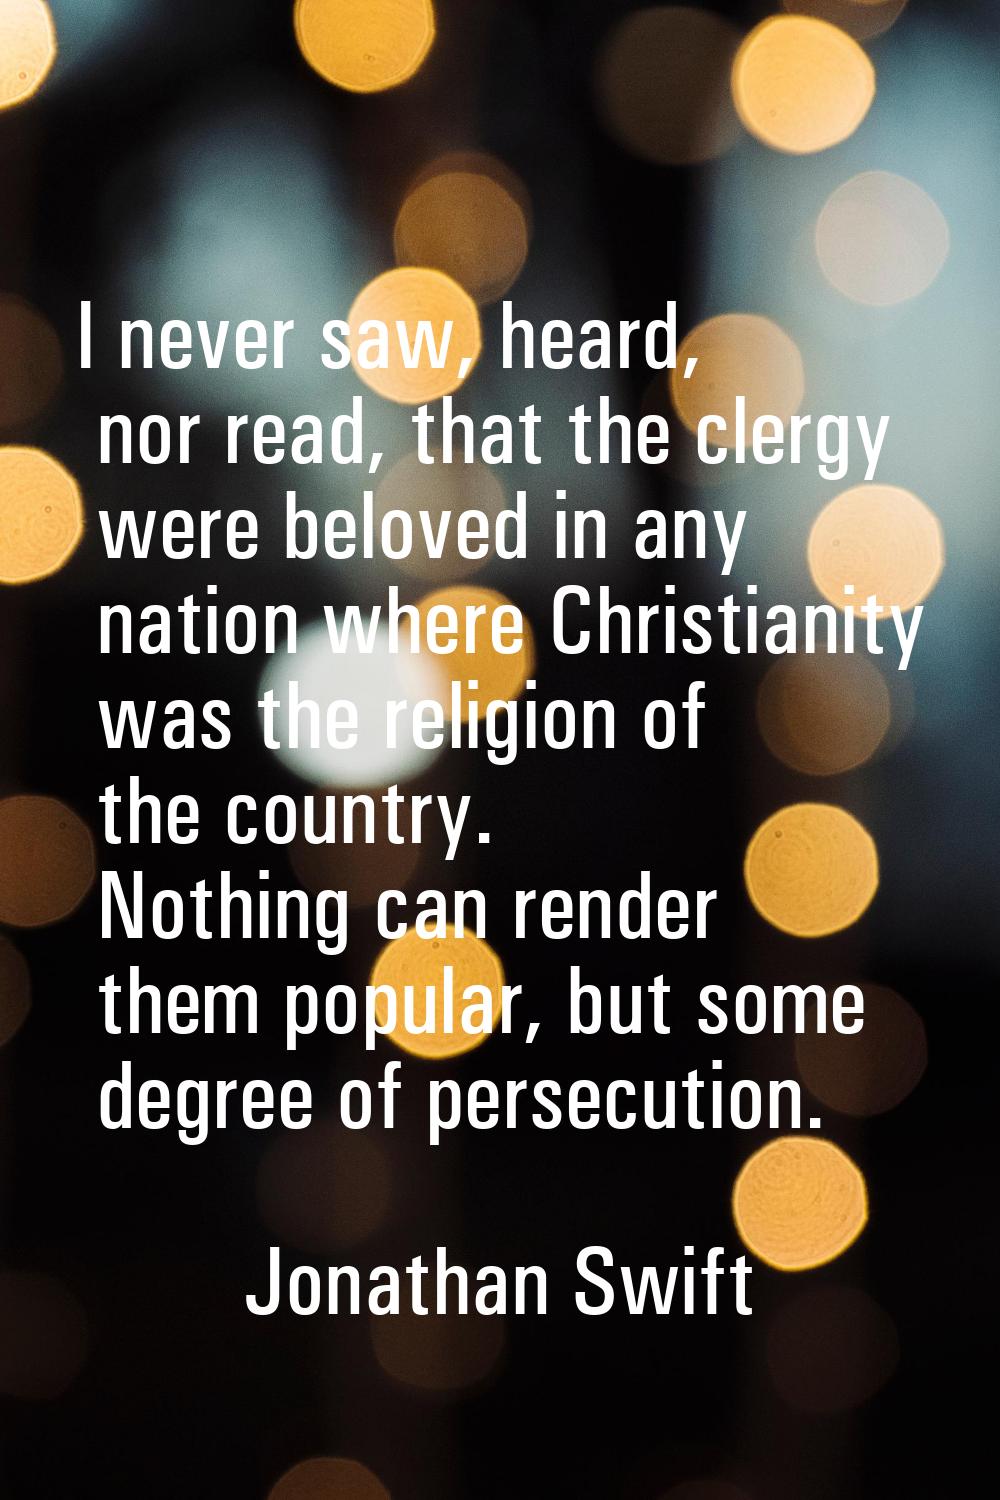 I never saw, heard, nor read, that the clergy were beloved in any nation where Christianity was the